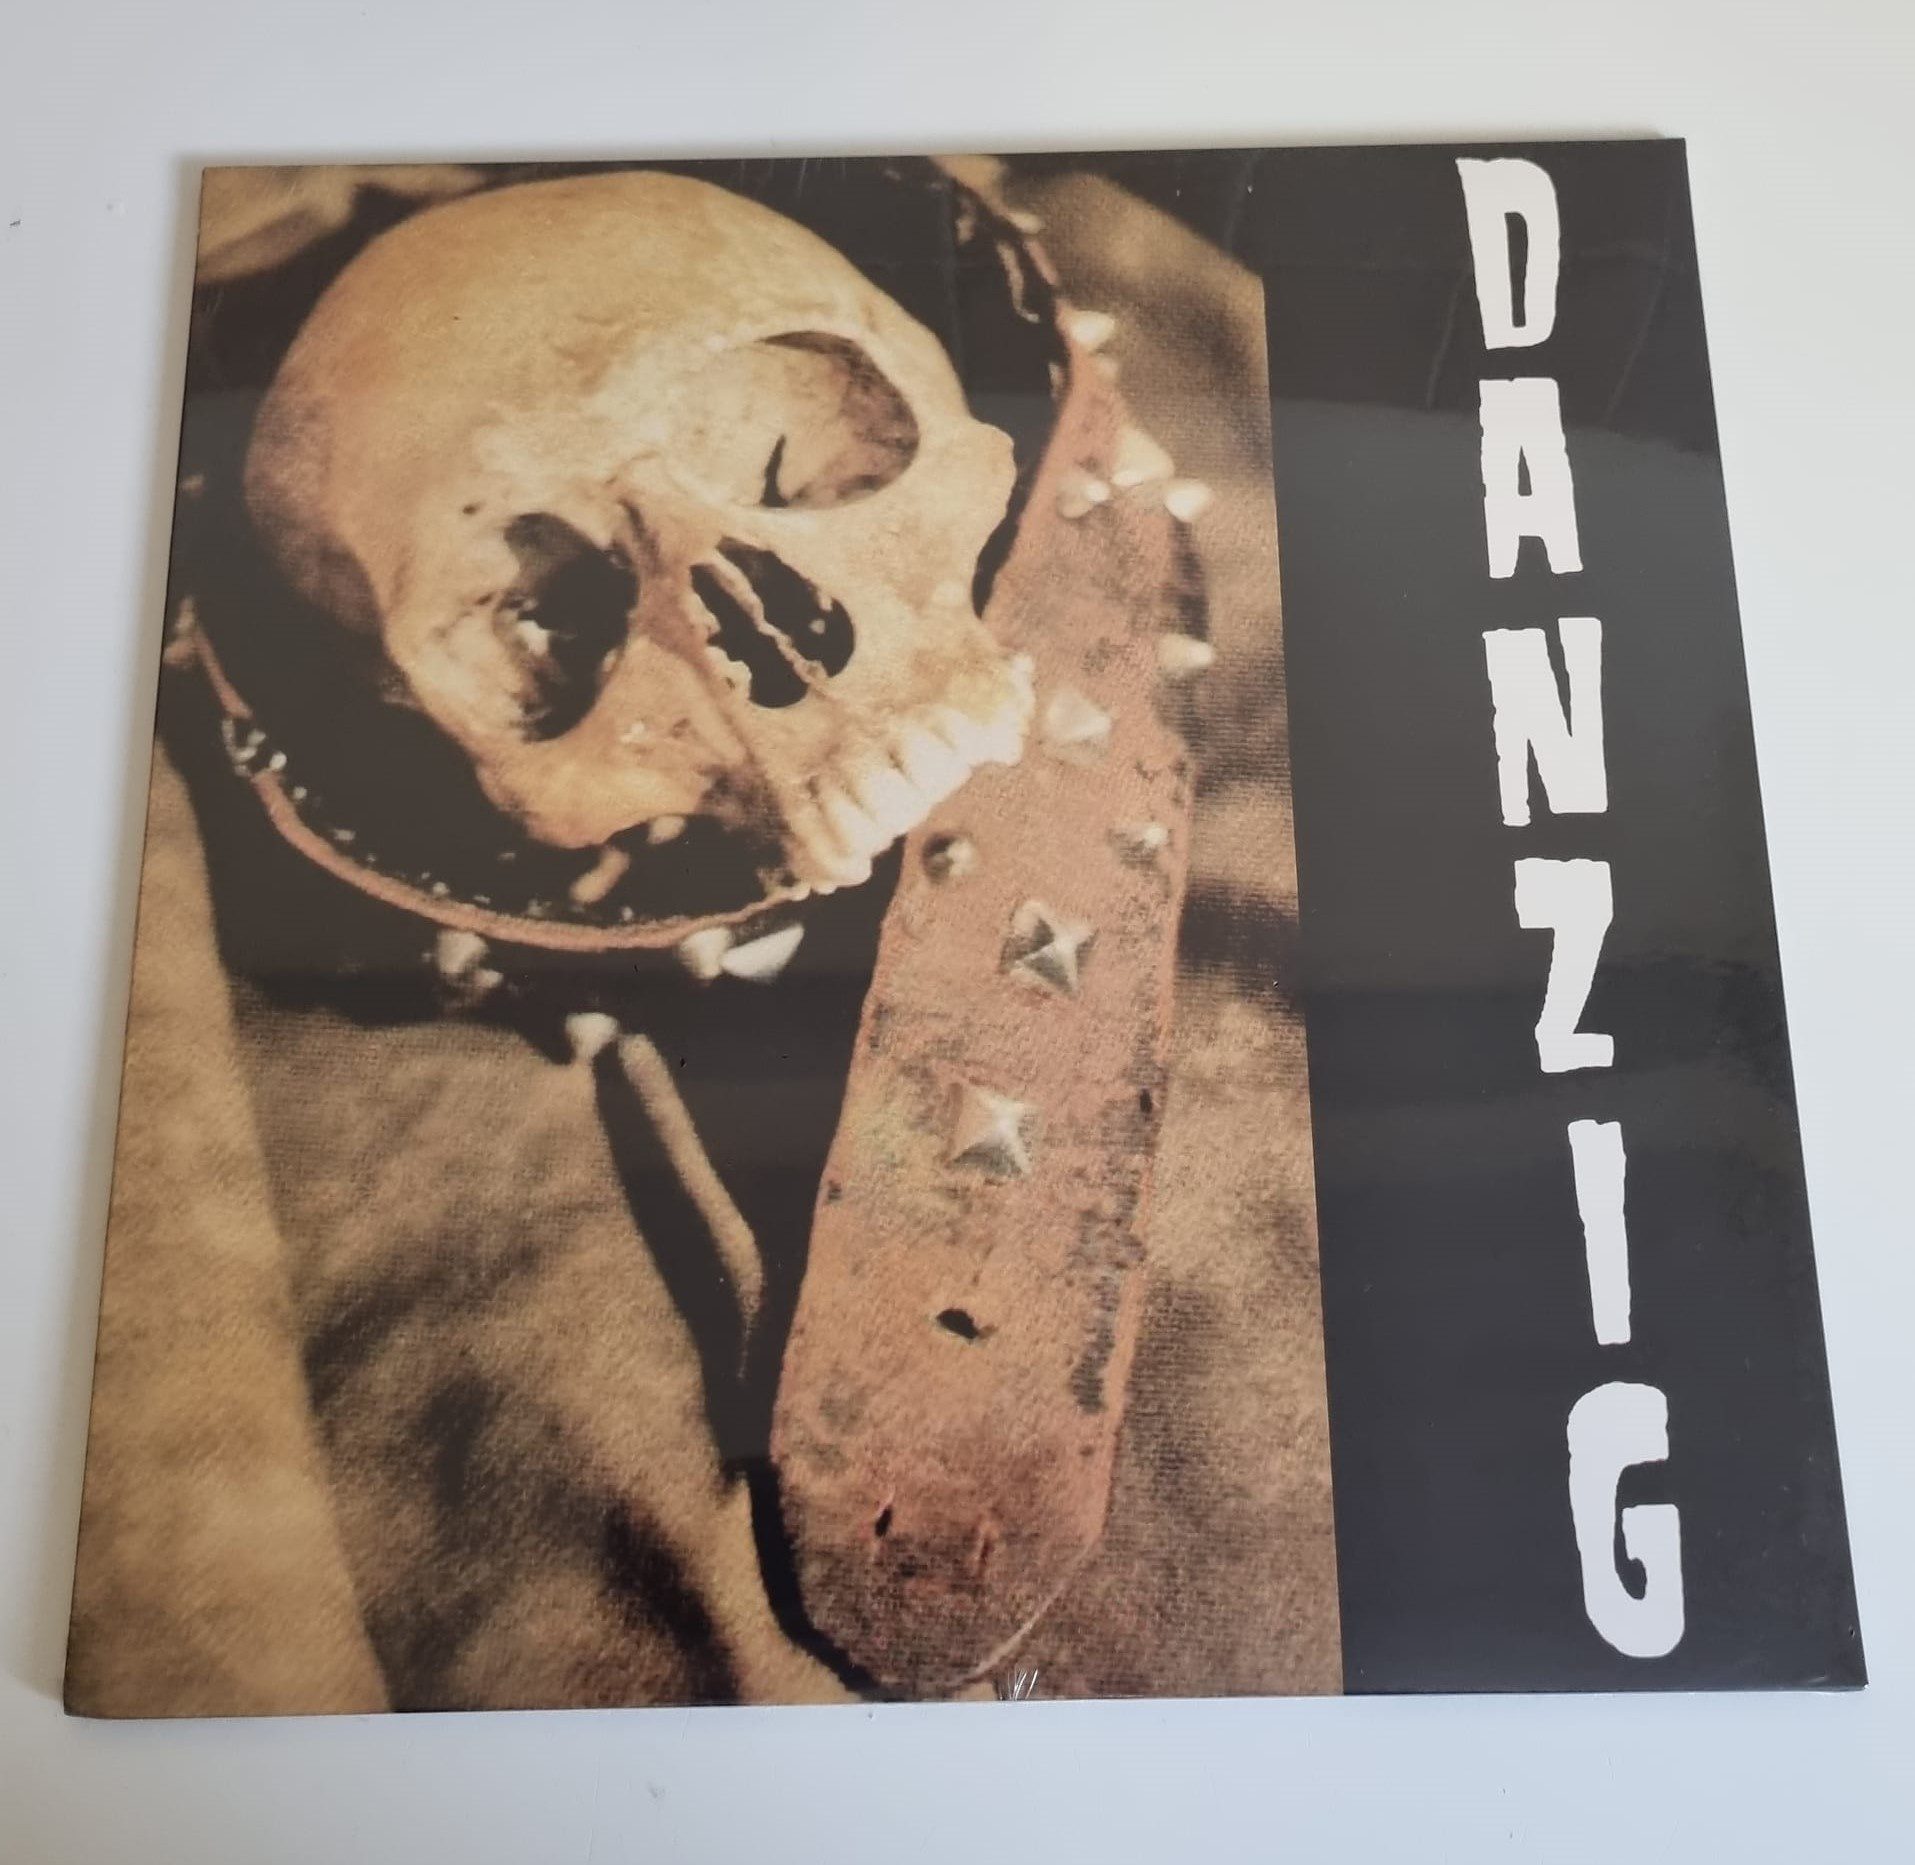 Buy this rare Danzig record by clicking here